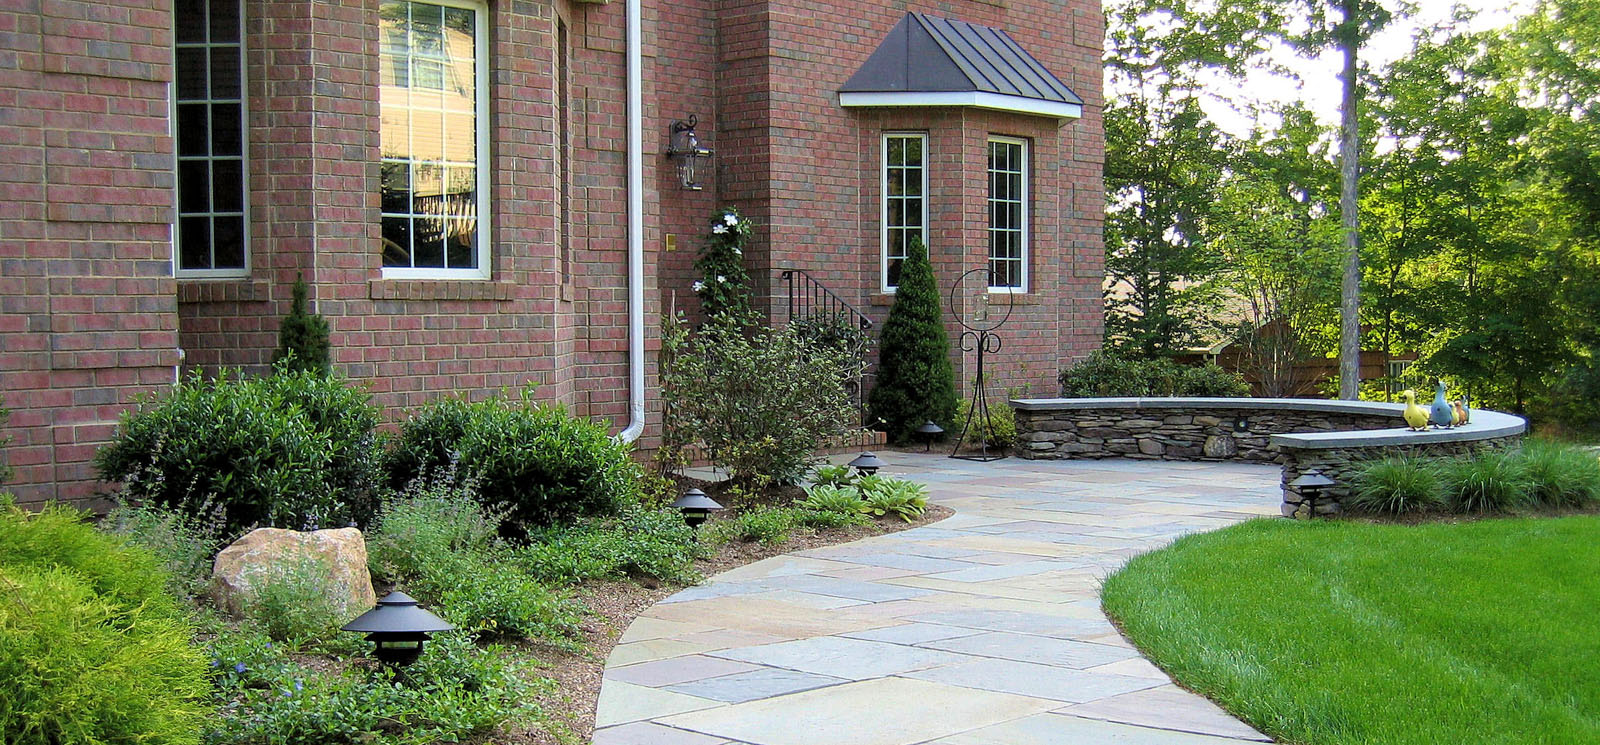 bluestone walkway with patio area and curved seat wall